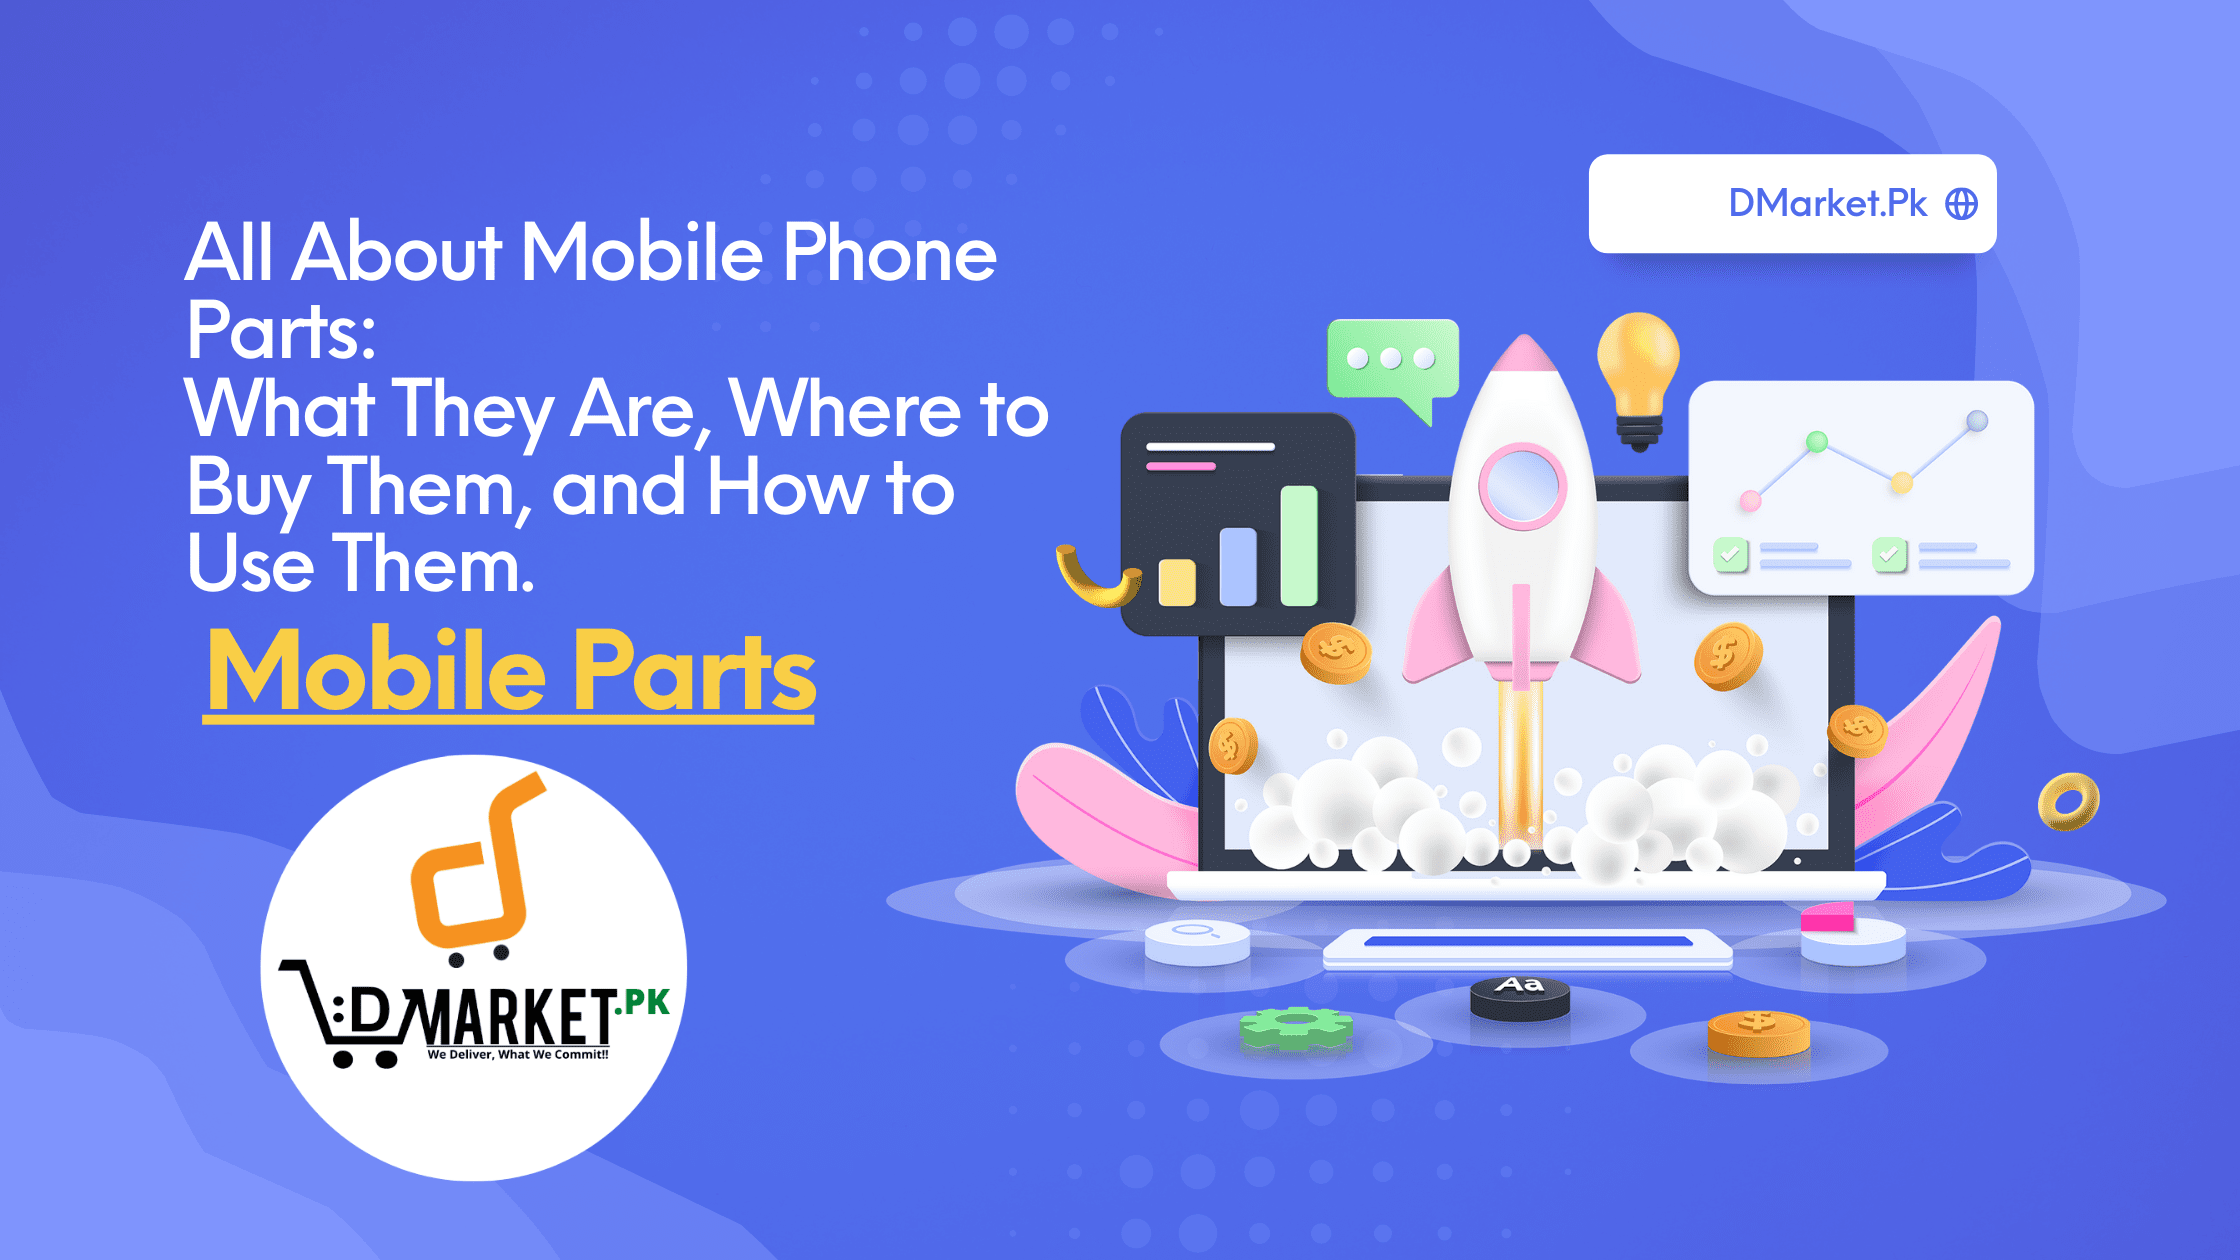 All About Mobile Phone Parts